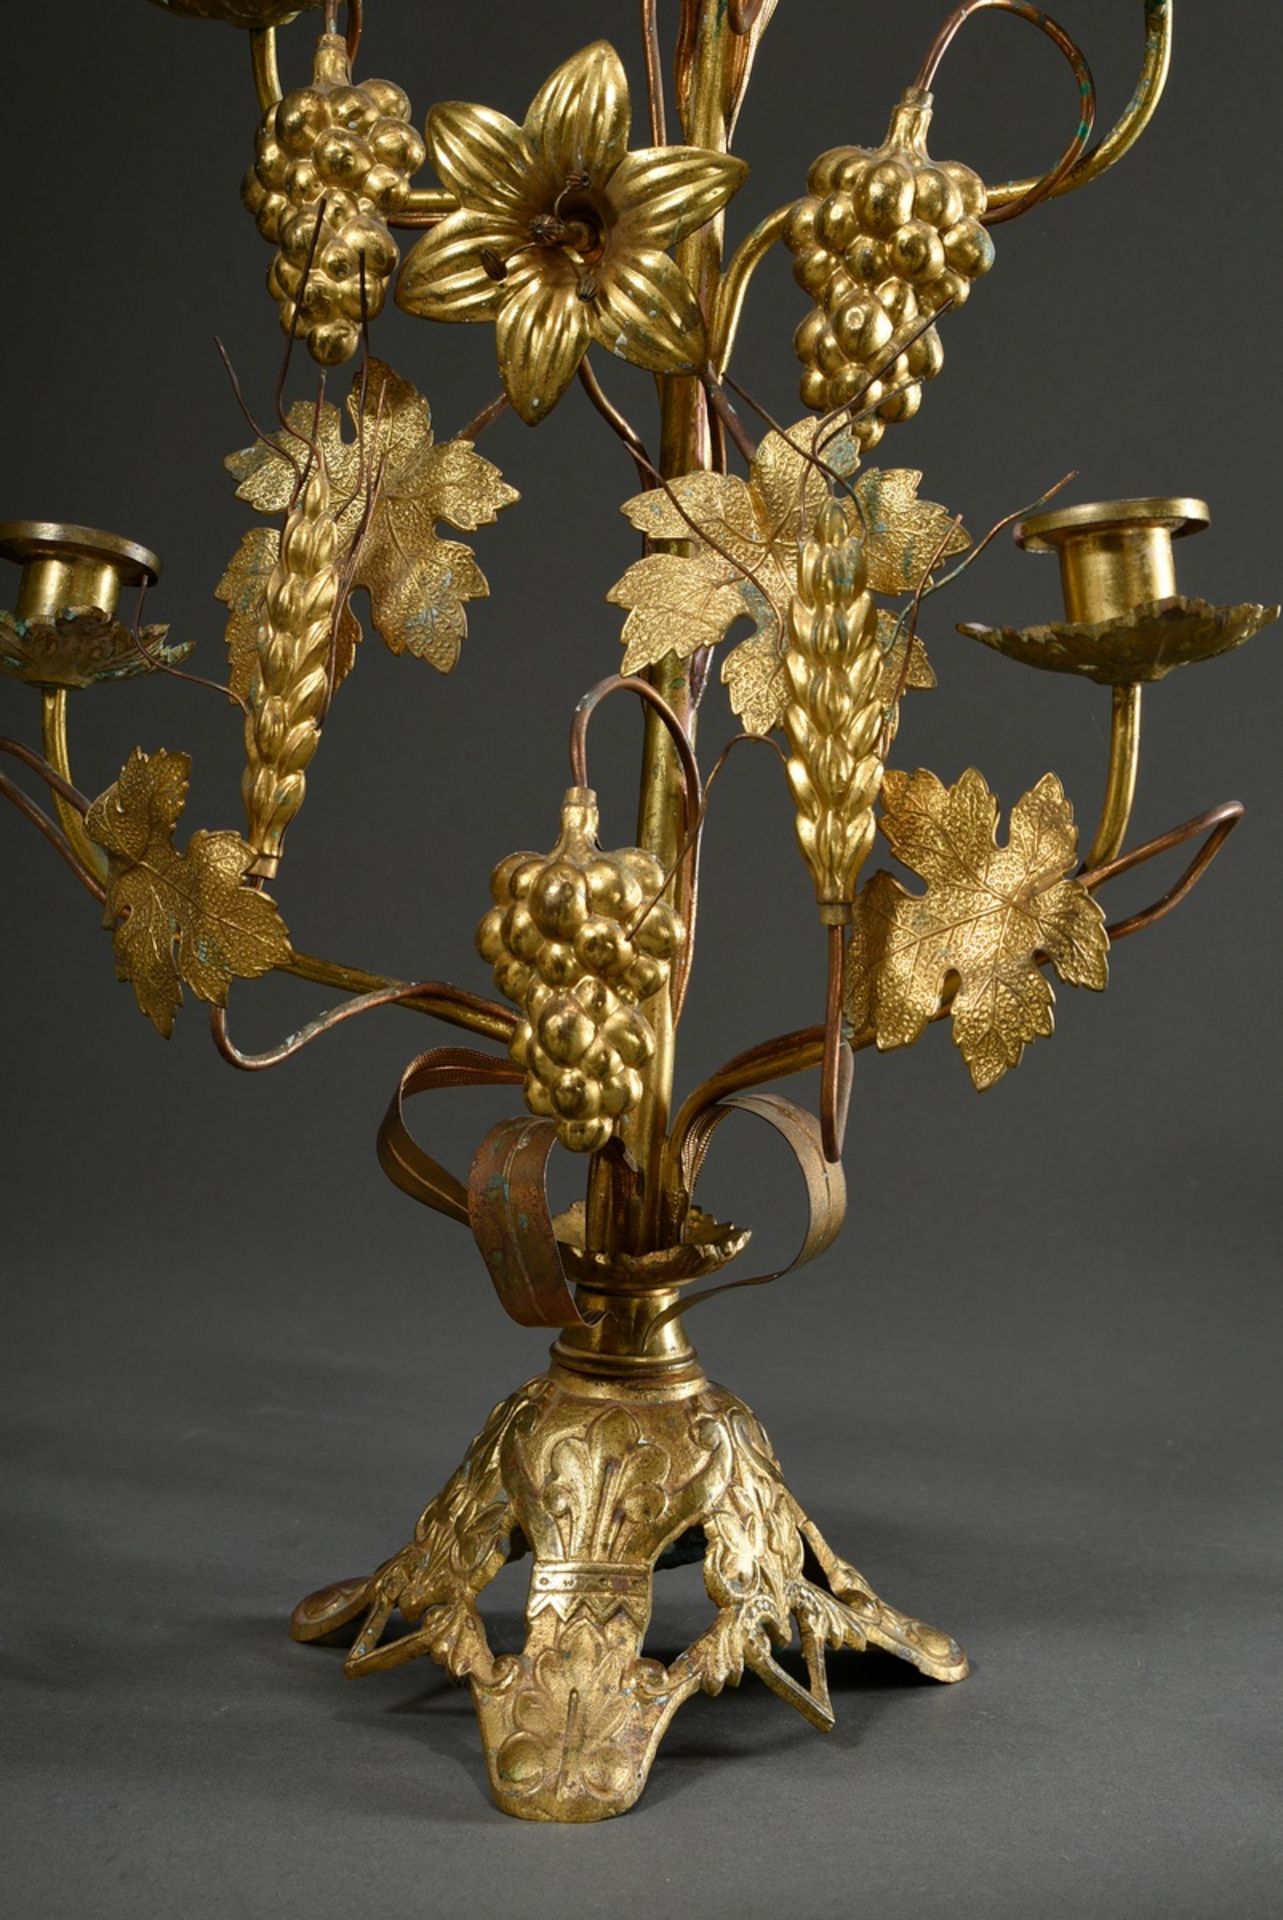 Pair of Marian or altar candlesticks with sculptural lily blossoms, grapes and ears of grain on orn - Image 3 of 6